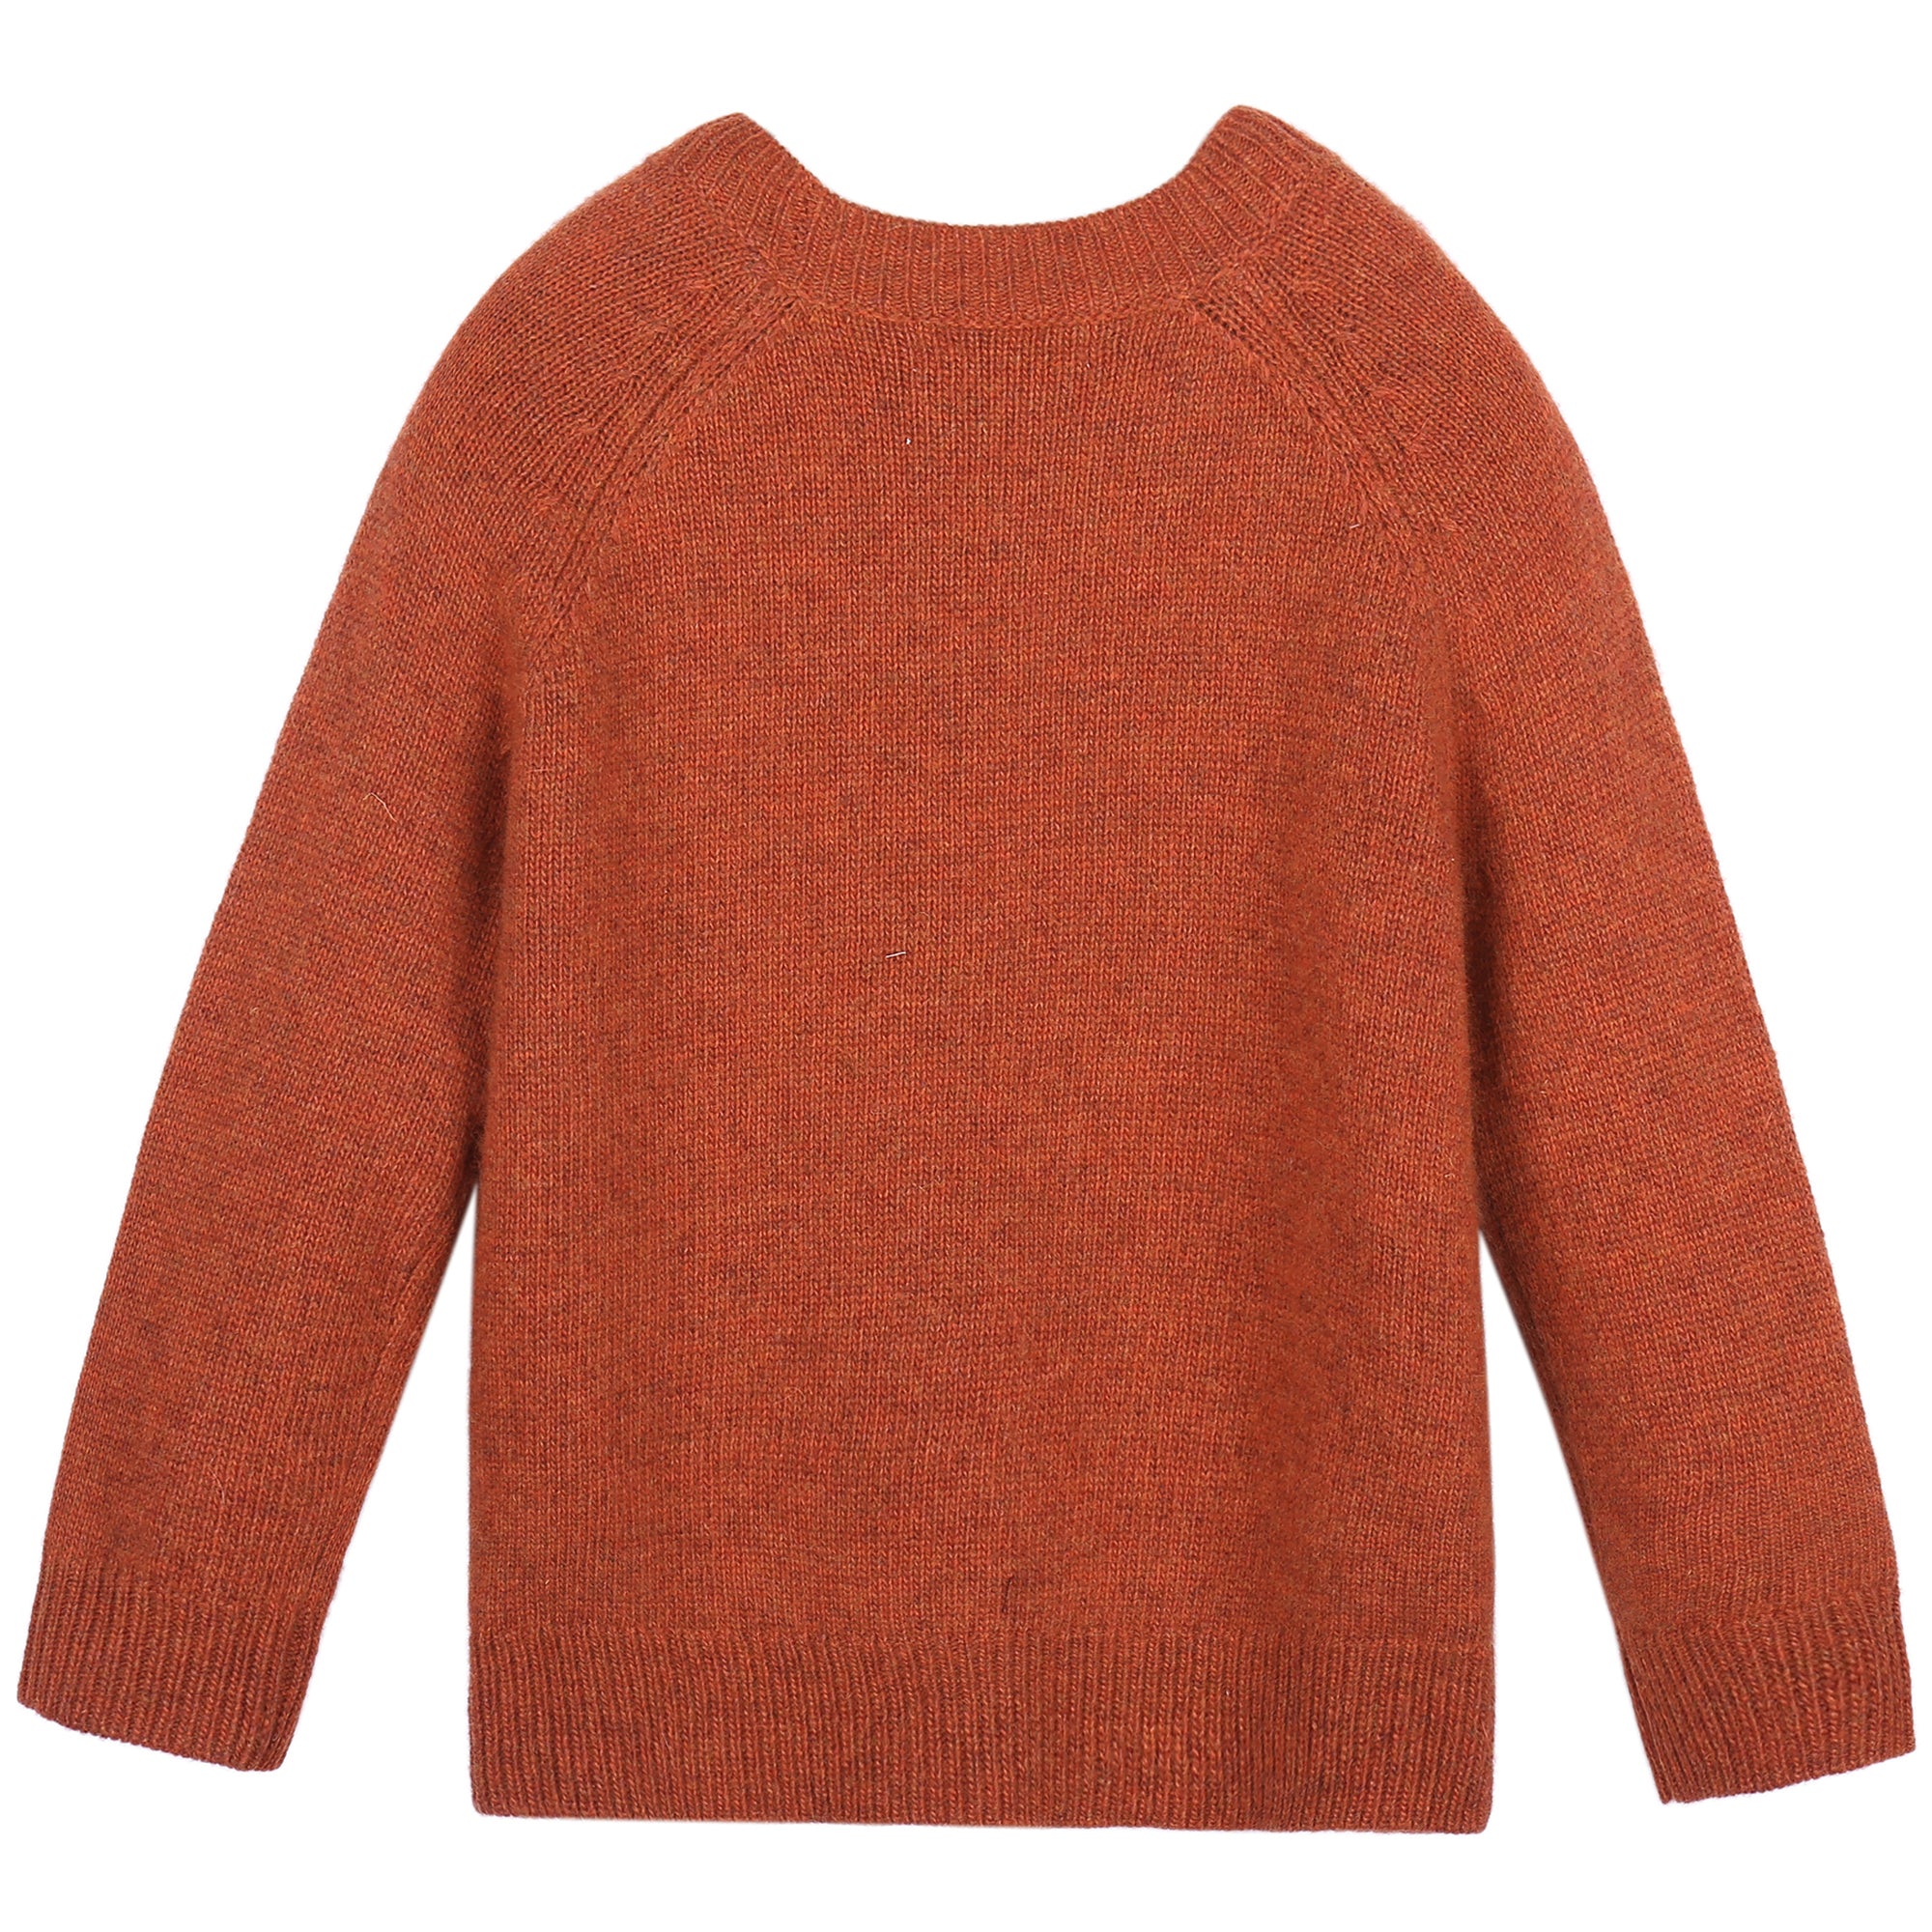 Boys Girls Red Canyon Knitted Sweater